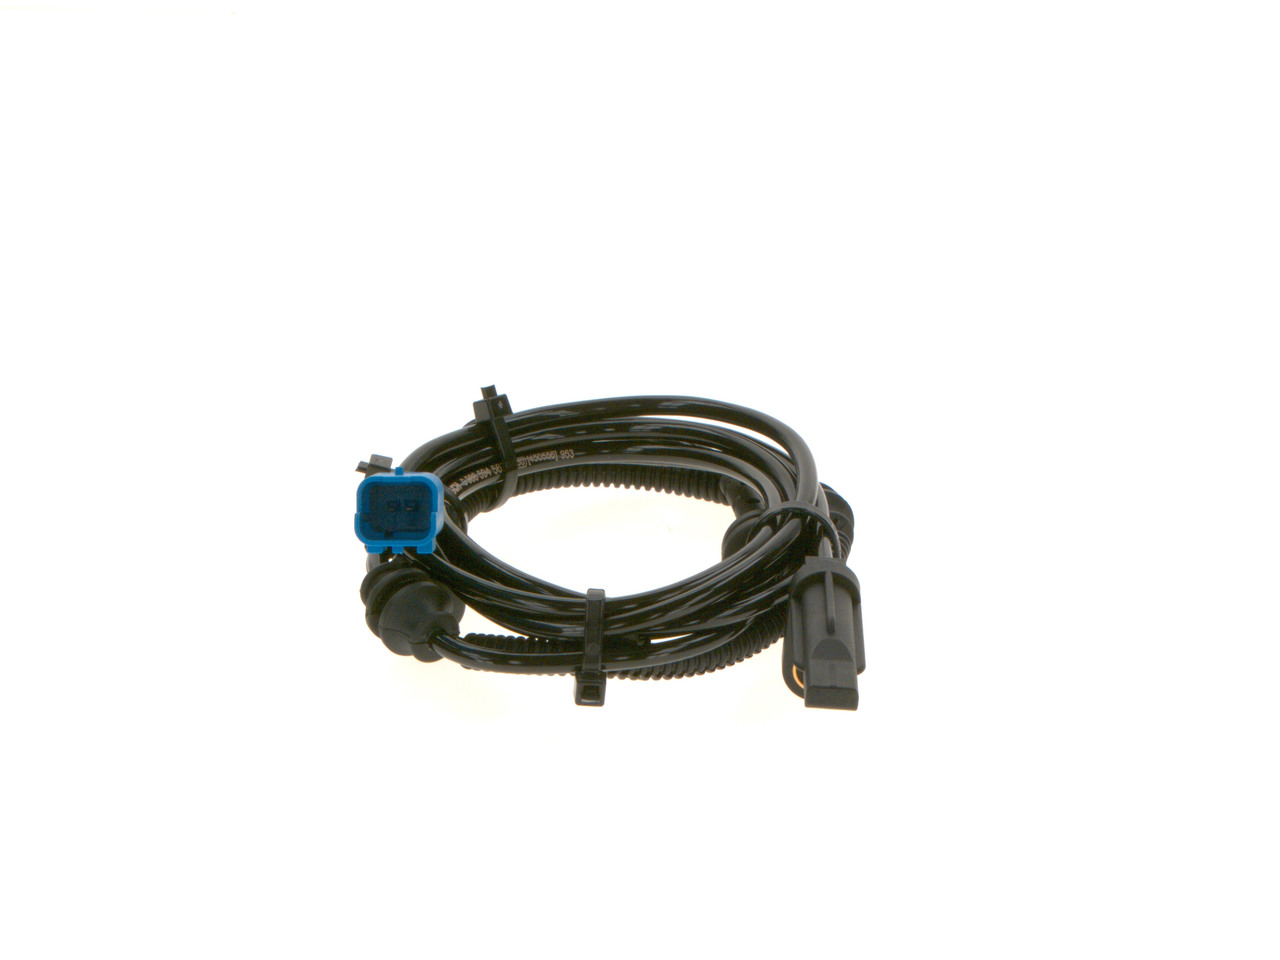 BOSCH 0 986 594 562 ABS sensor with cable, Active sensor, 1800mm